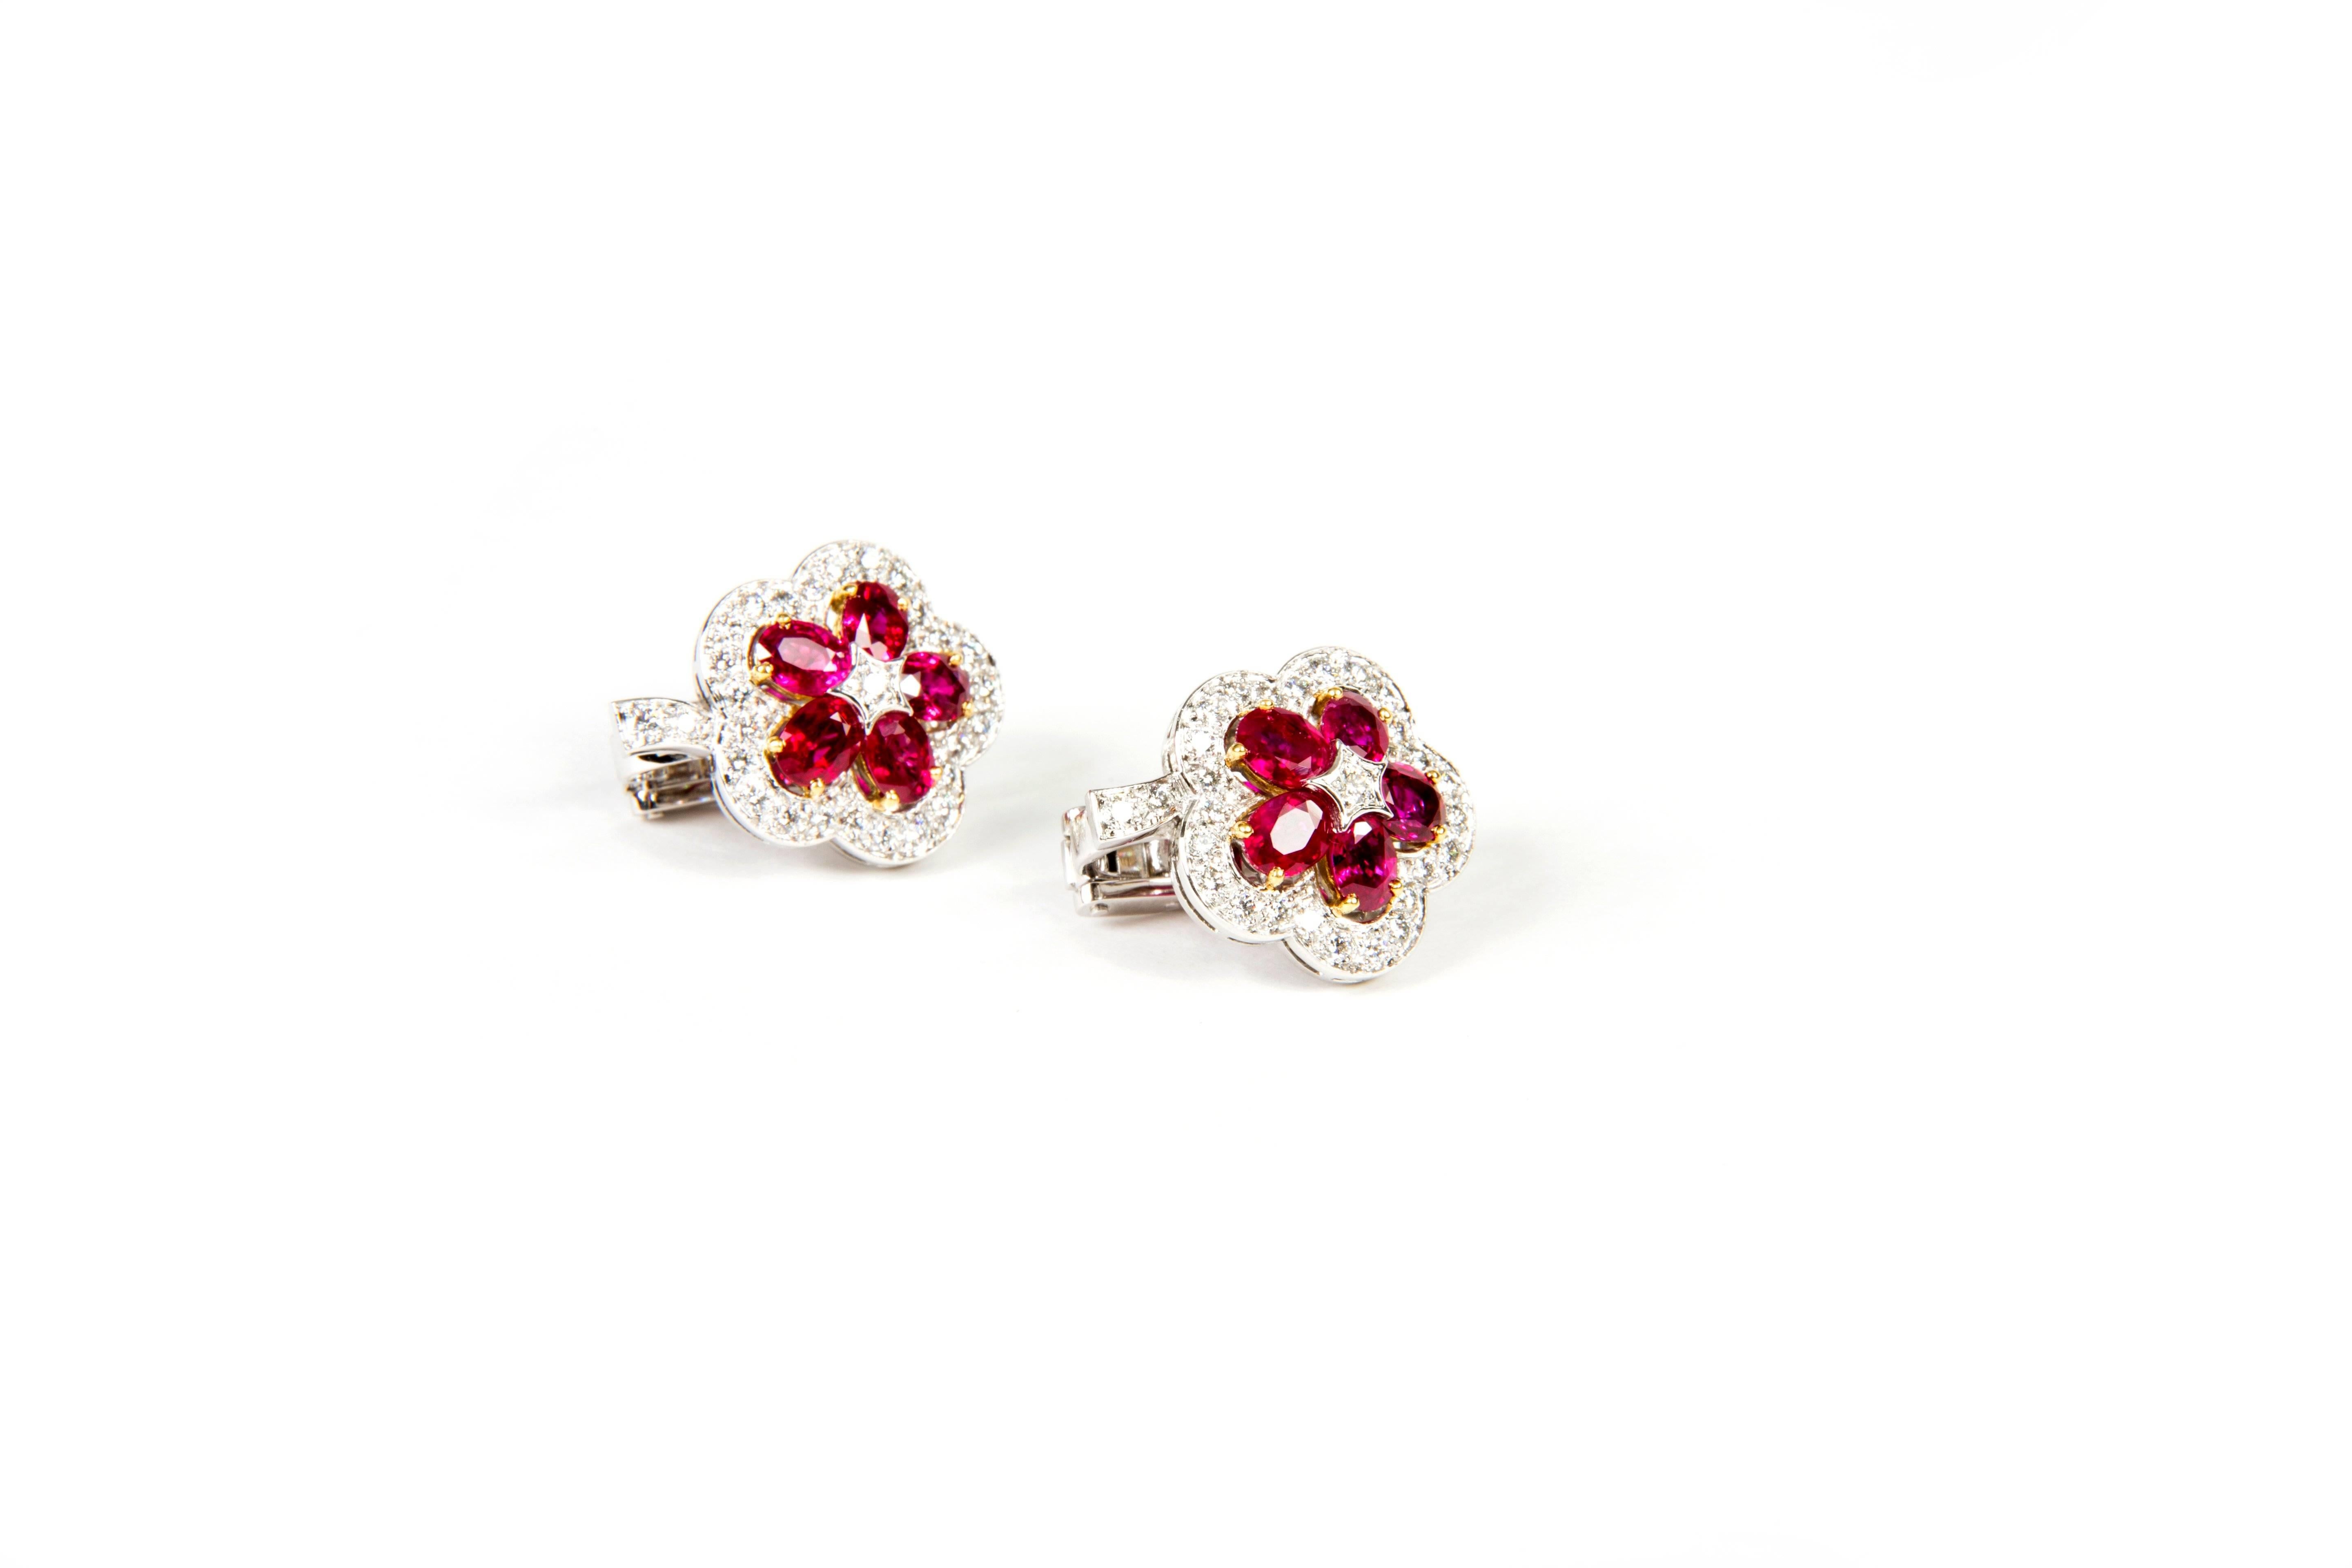 Absolute unique rubies and diamond earrings, to enhance your dresses with style and elegance.
Comes with clips and studs/ either can be removed upon request without charge

10 rubies 3.83 cts
diamonds 0.76 cts
18k white gold